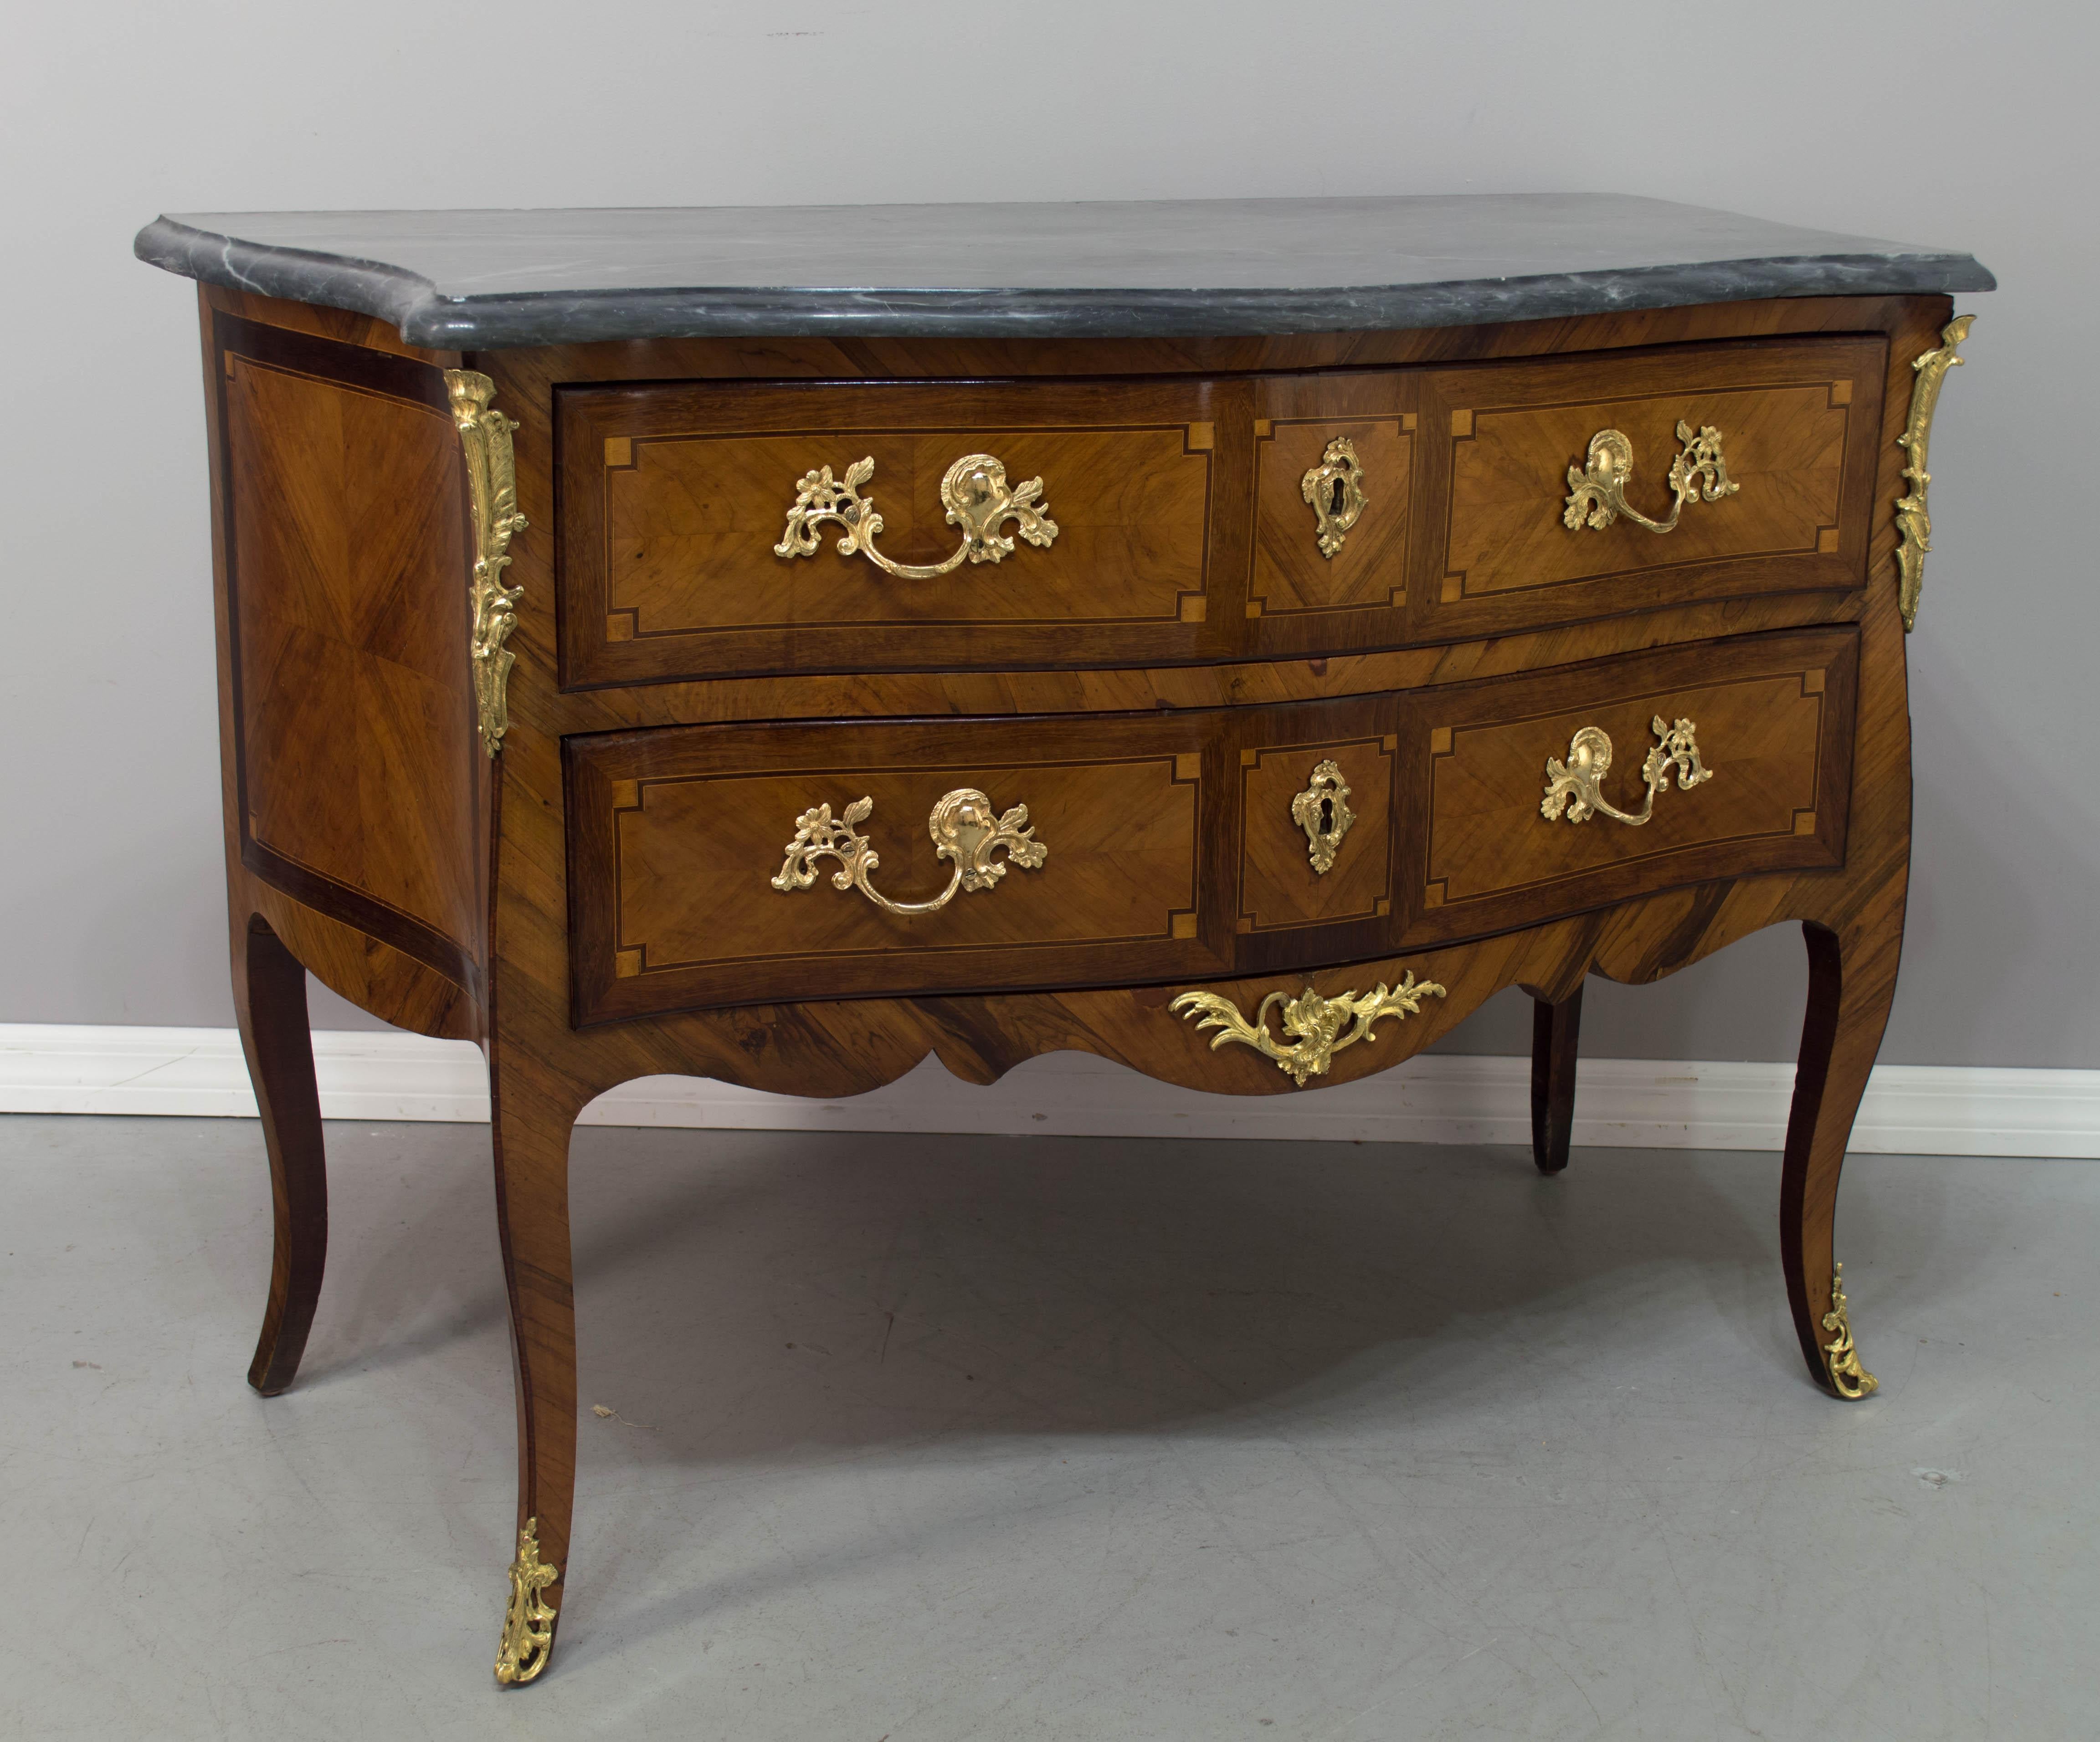 A very nice 18th century Louis XV commode with serpentine front and curved sides with marquetry inlay with veneer of cherry, mahogany and walnut. French polish finish. Two dovetailed drawers with locks, but no key. Original polished bronze hardware.